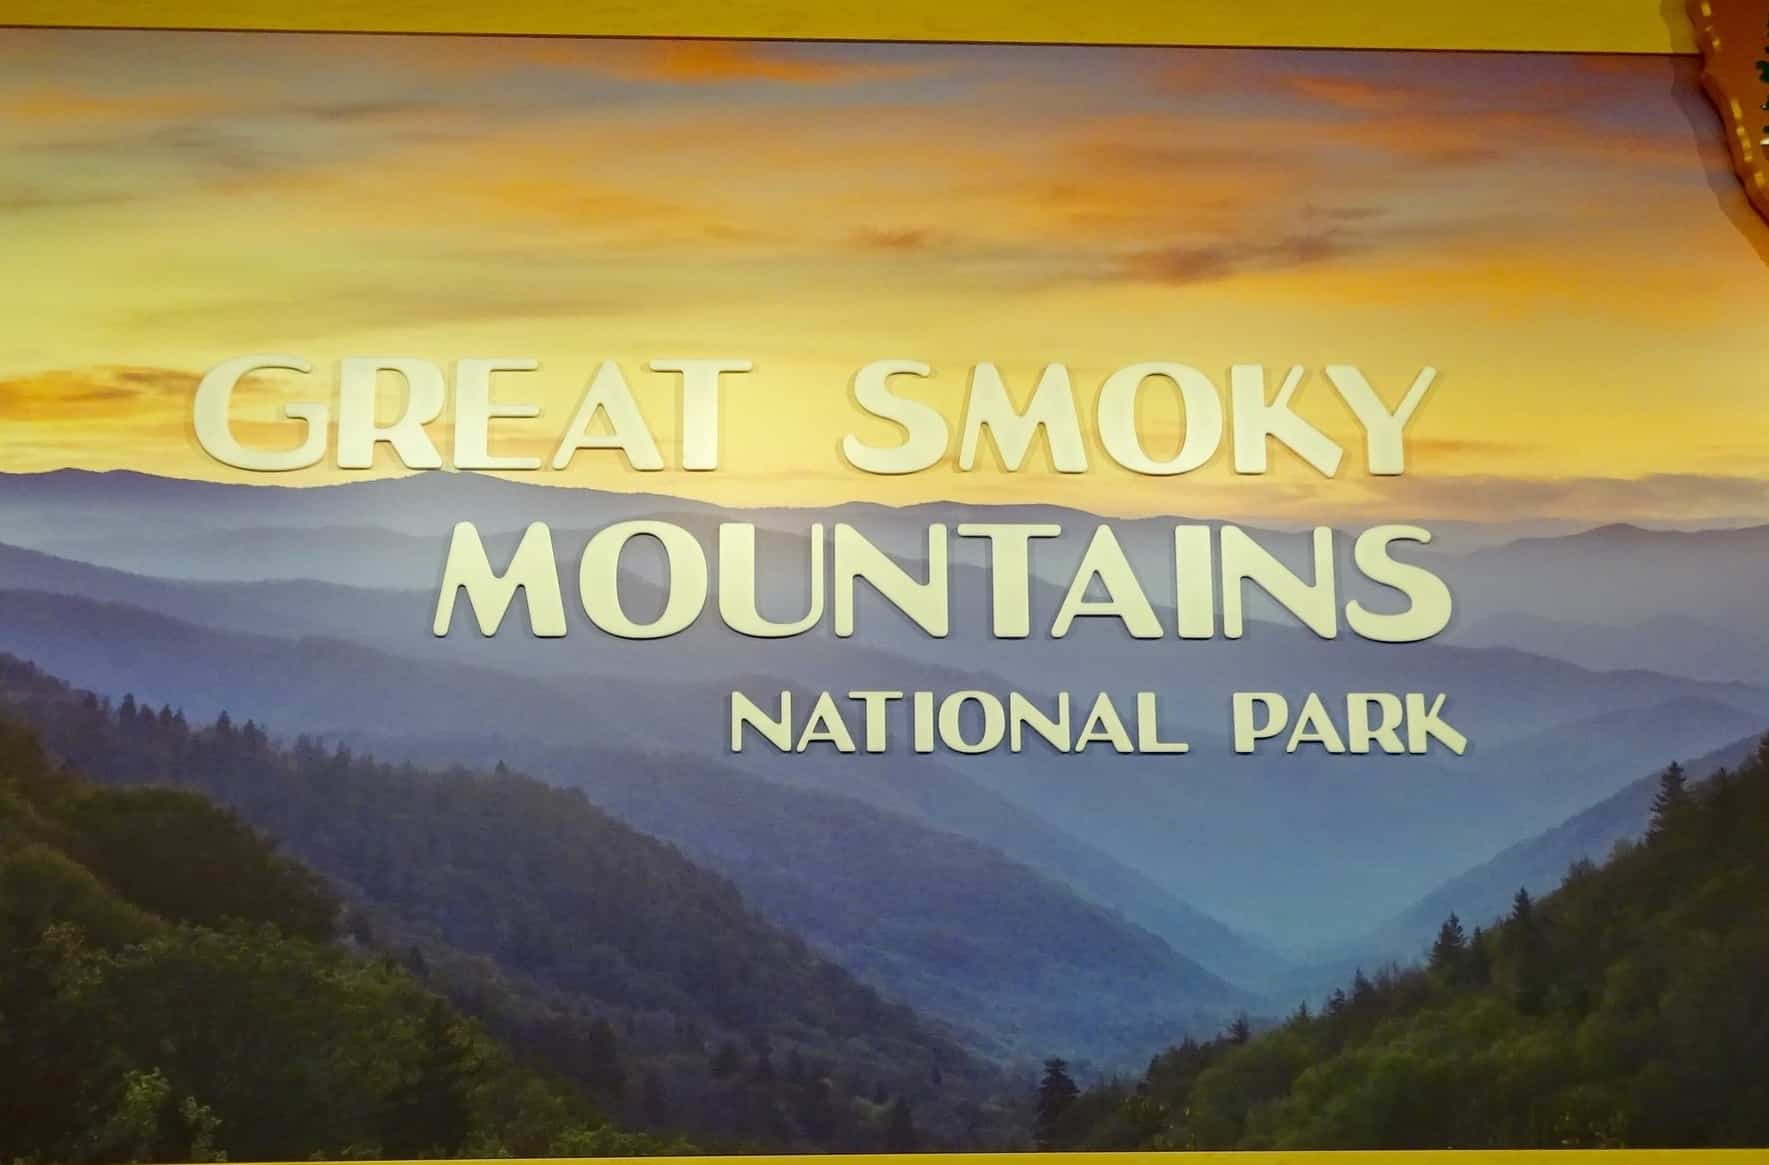 How to Explore the Great Smoky Mountains if You Don’t Hike or Camp